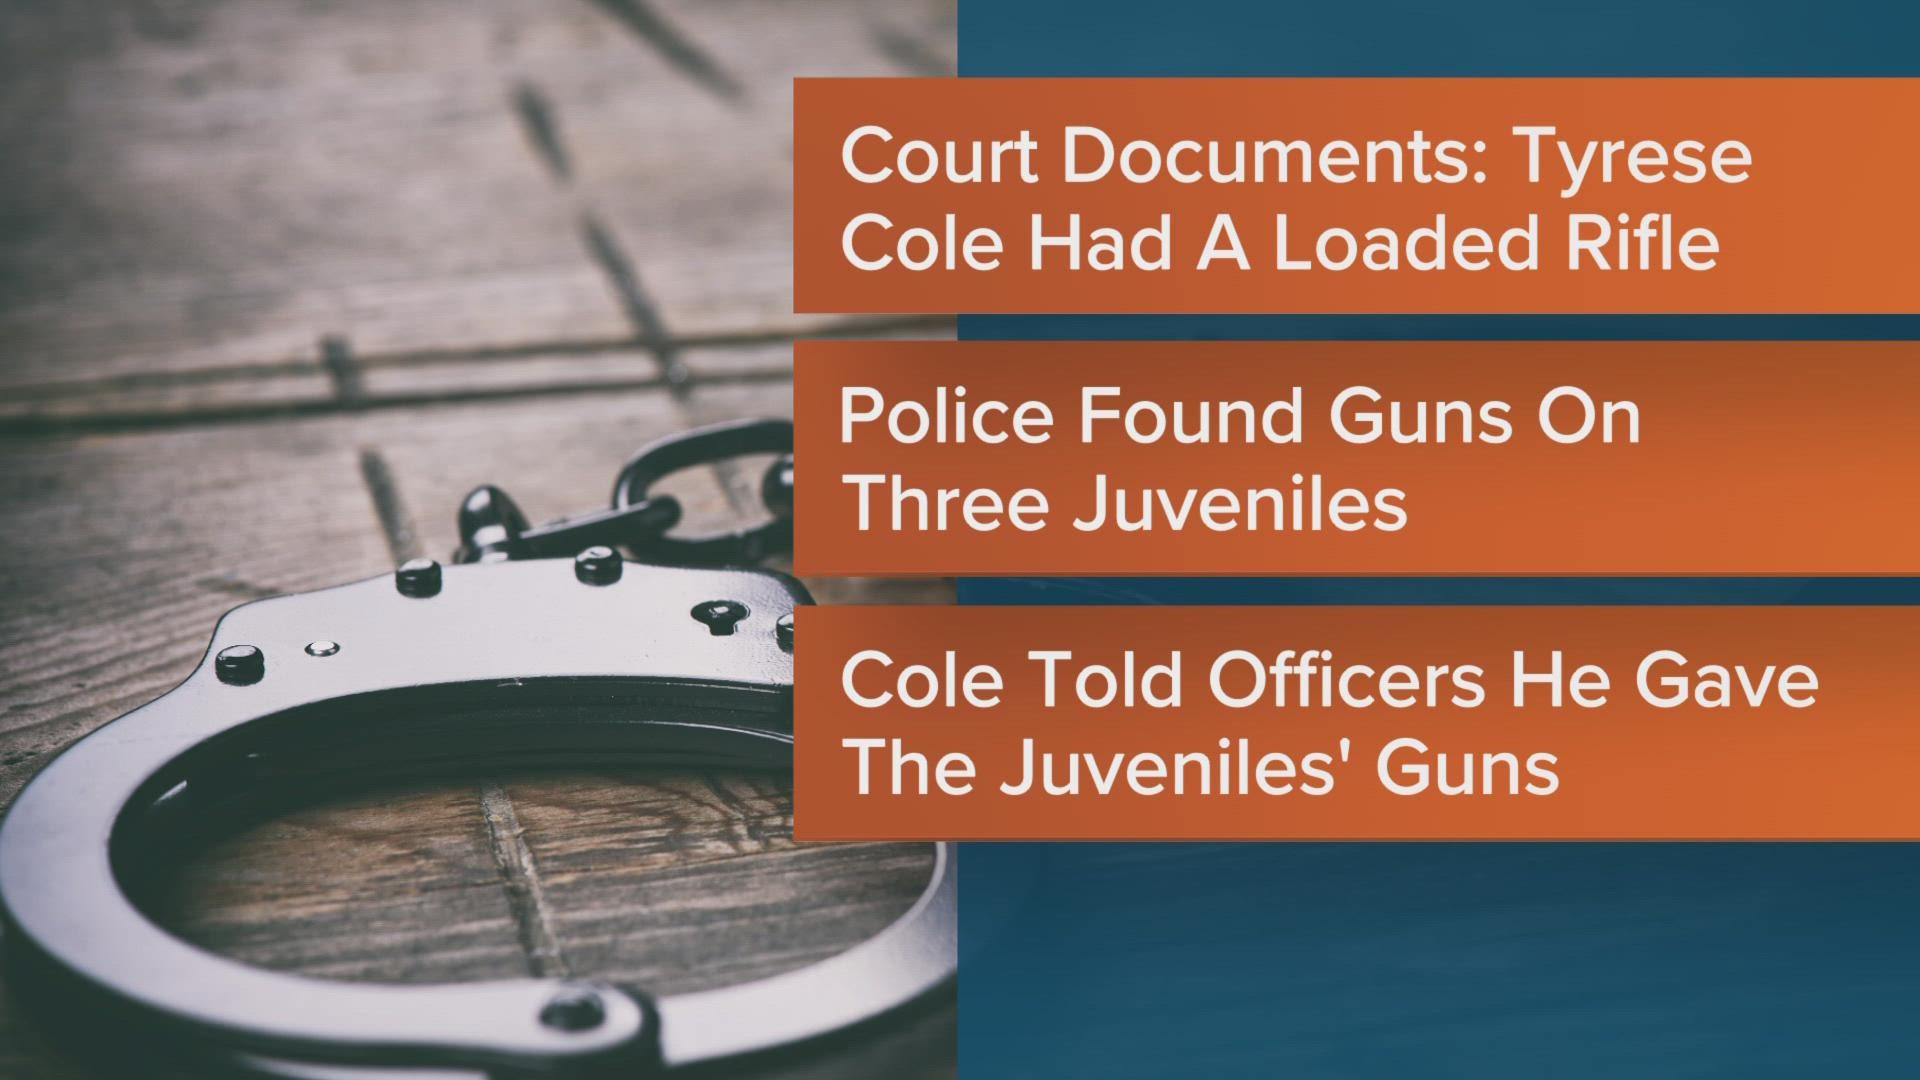 According to court documents, Tyrese Cole had a rifle with the safety off and set to fire with a live 300 blackout round in the chamber.